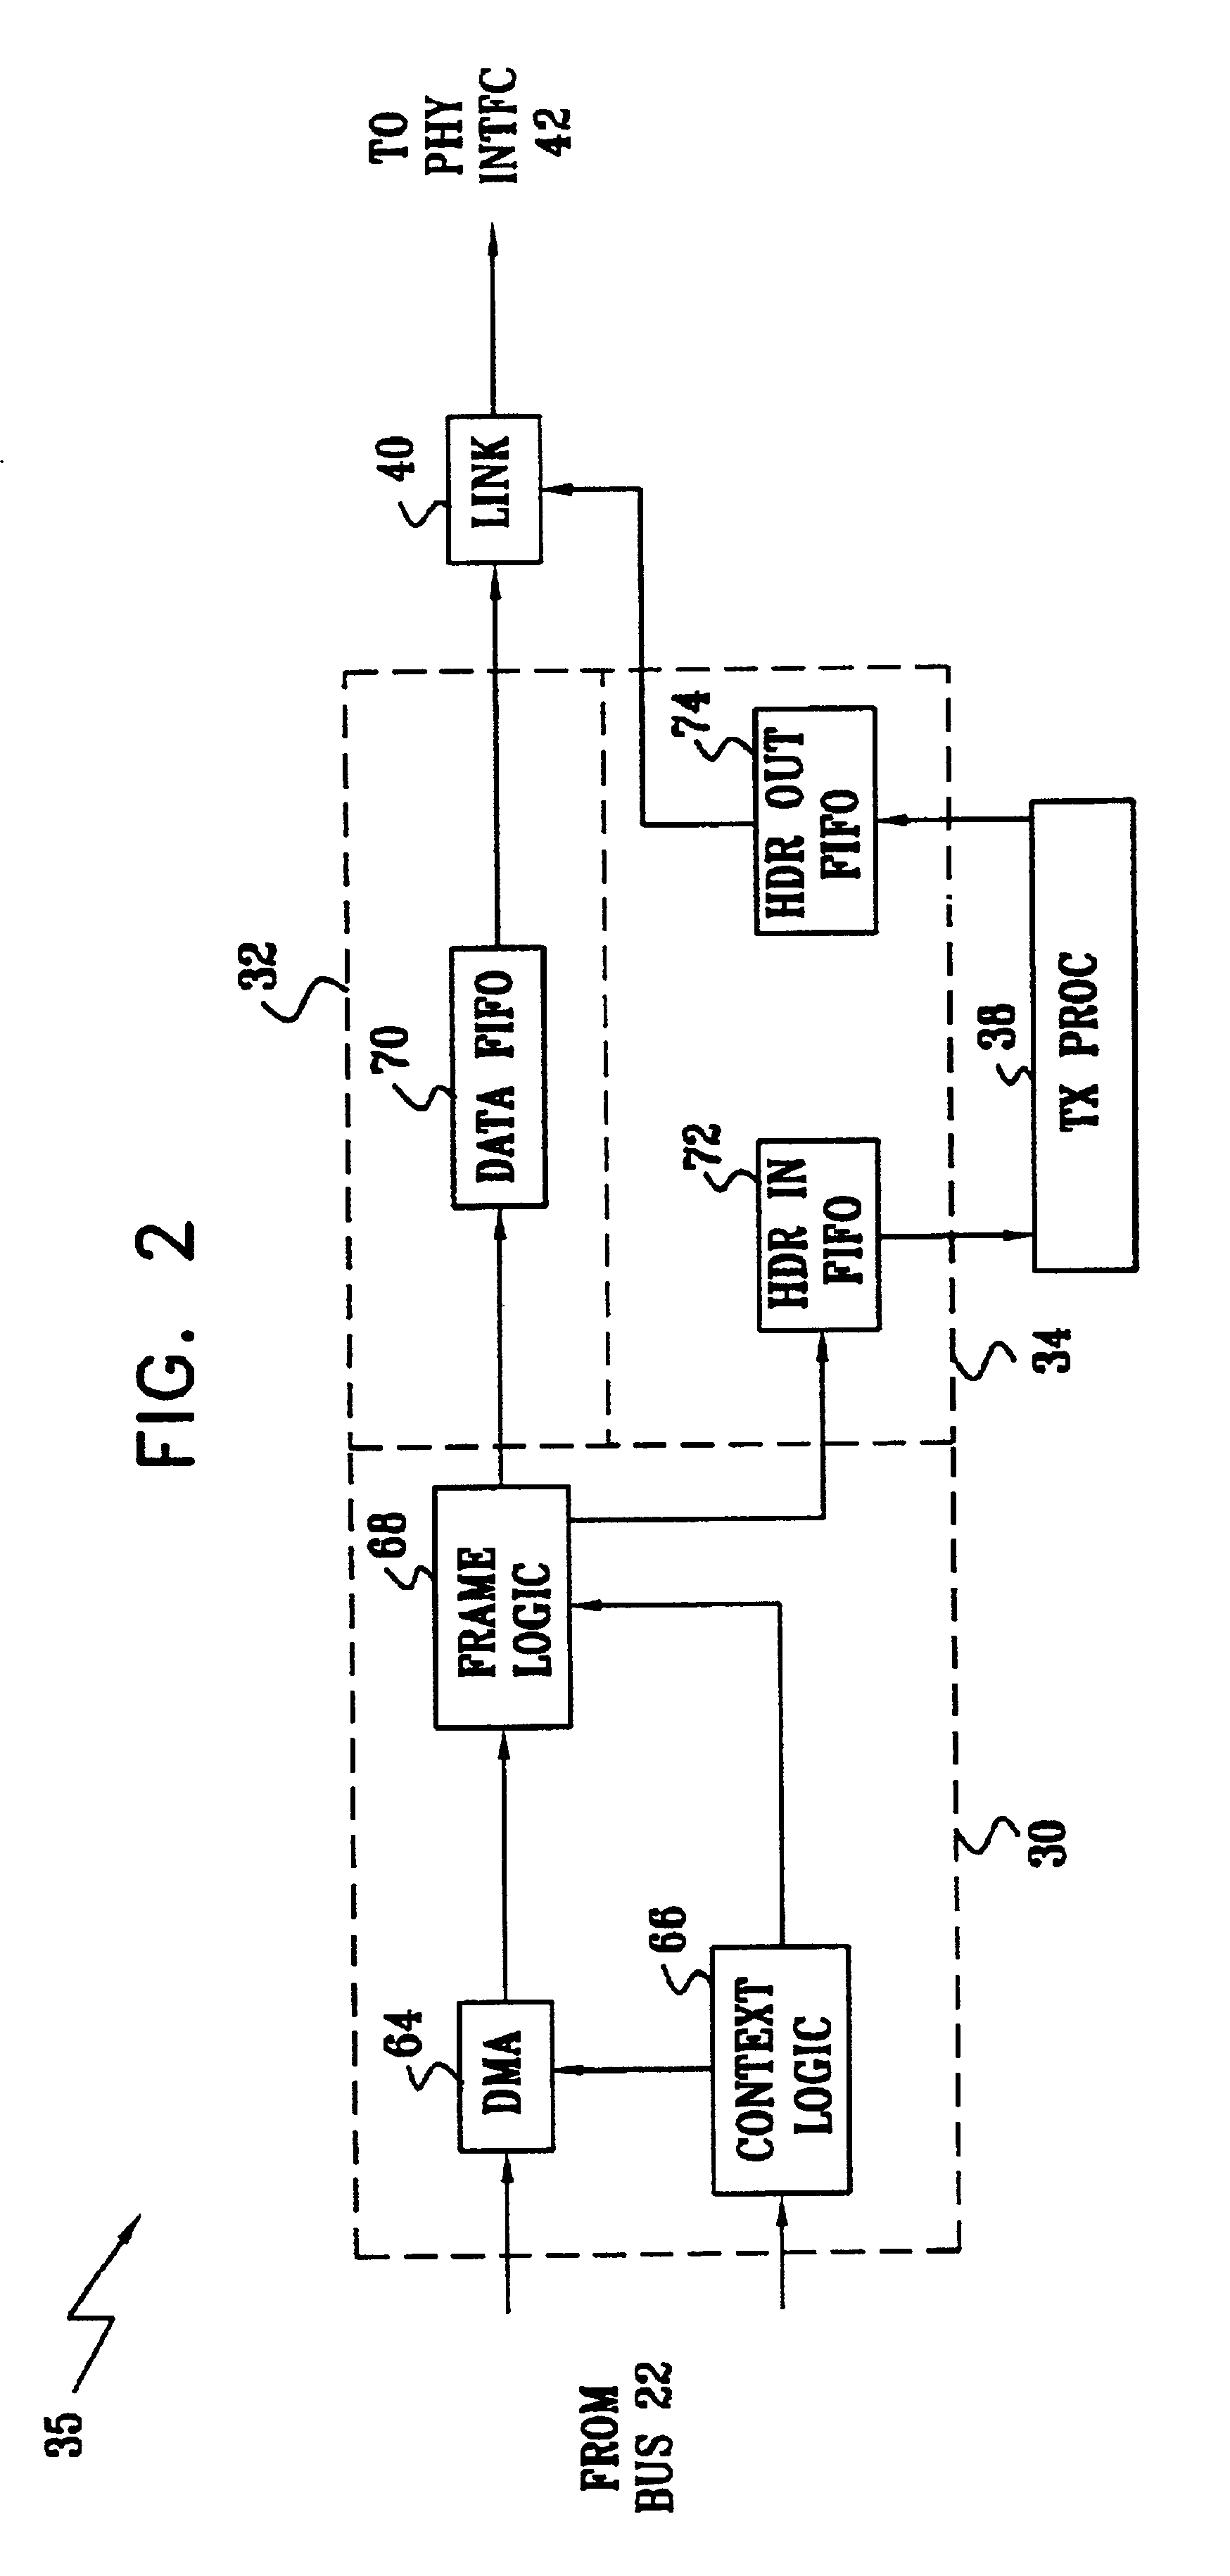 Network adapter with embedded deep packet processing